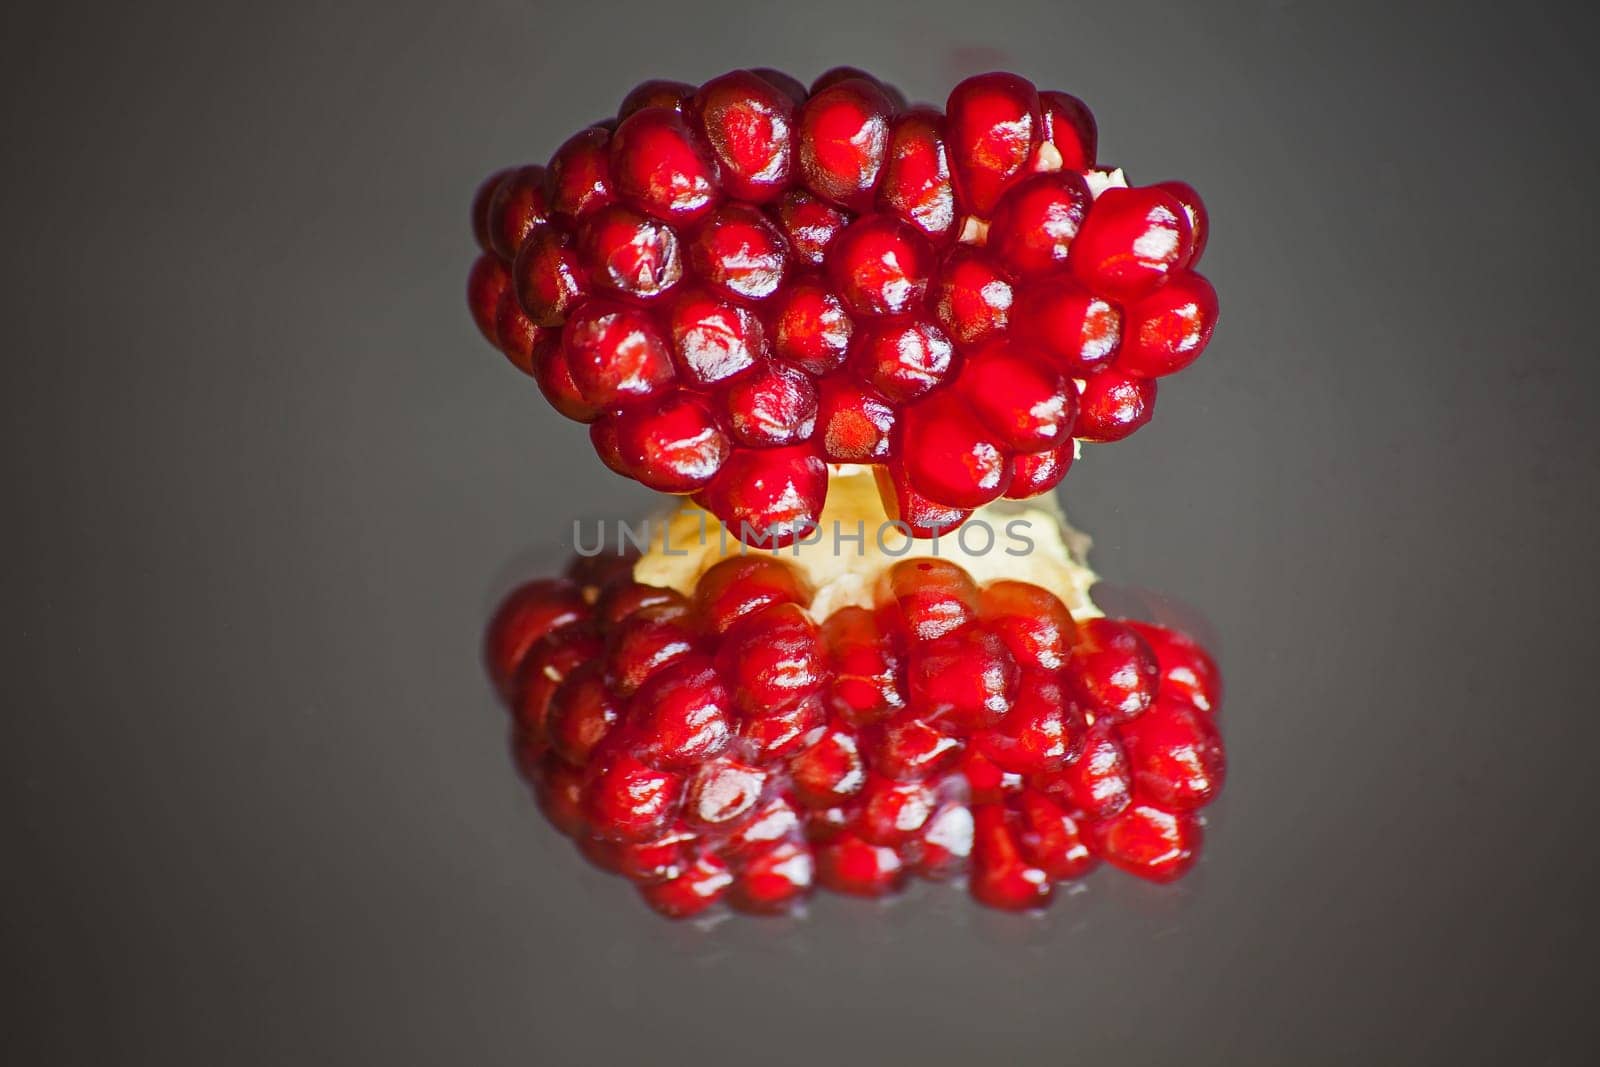 Ripe Pomegranate seeds in the fruit body reflected in glass, on a dark blurred background